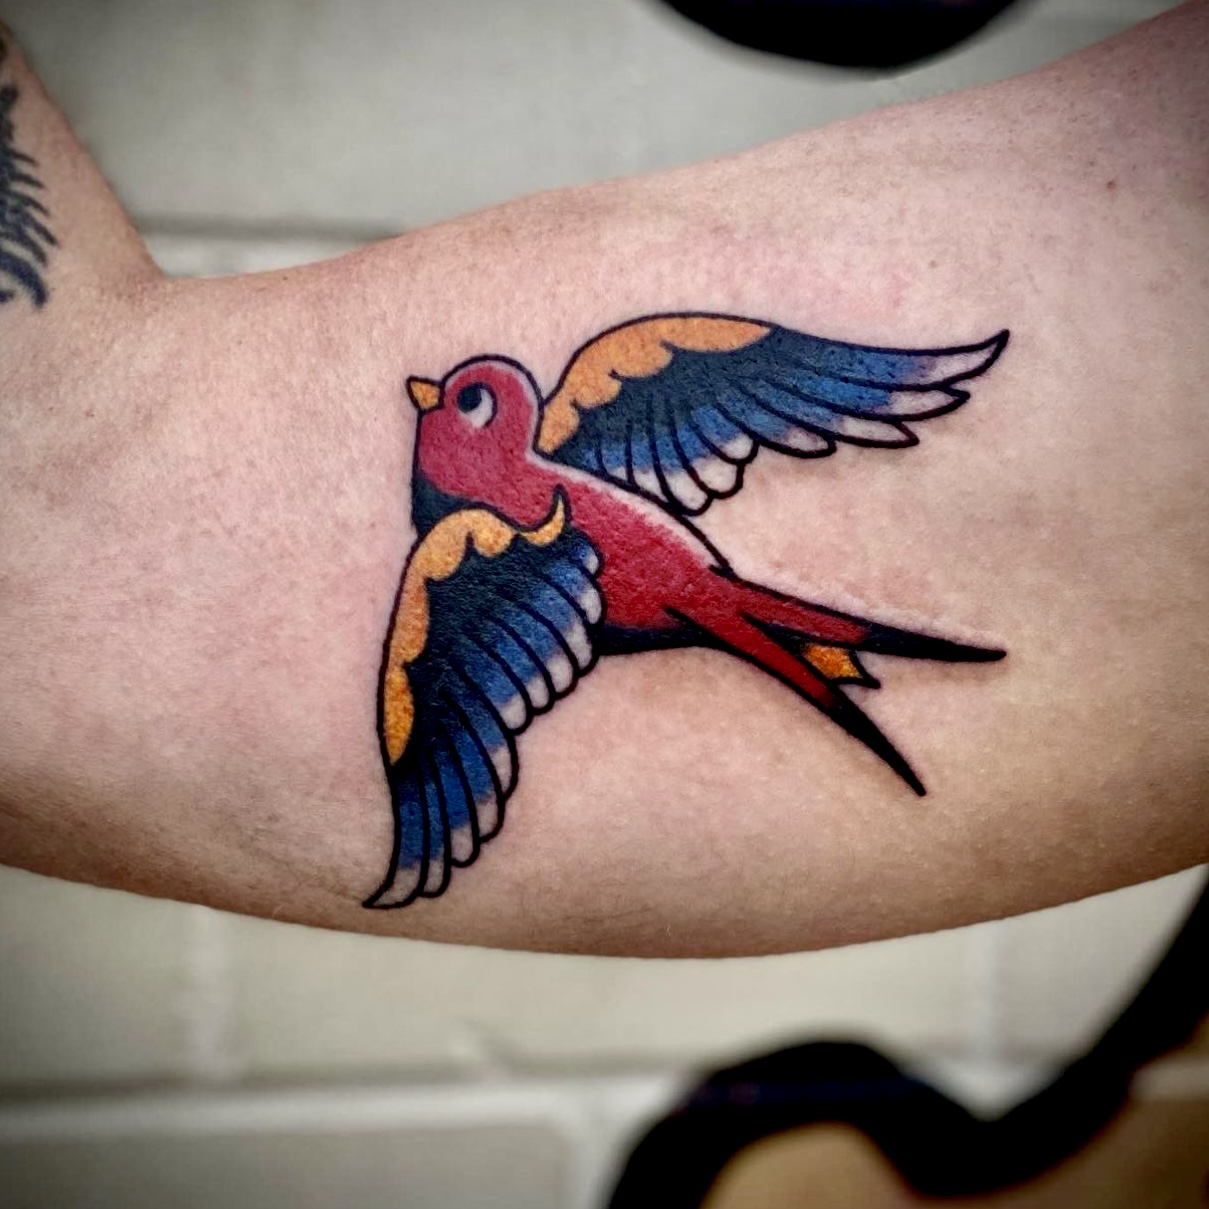 Tattoo of a red, yellow, and blue bird